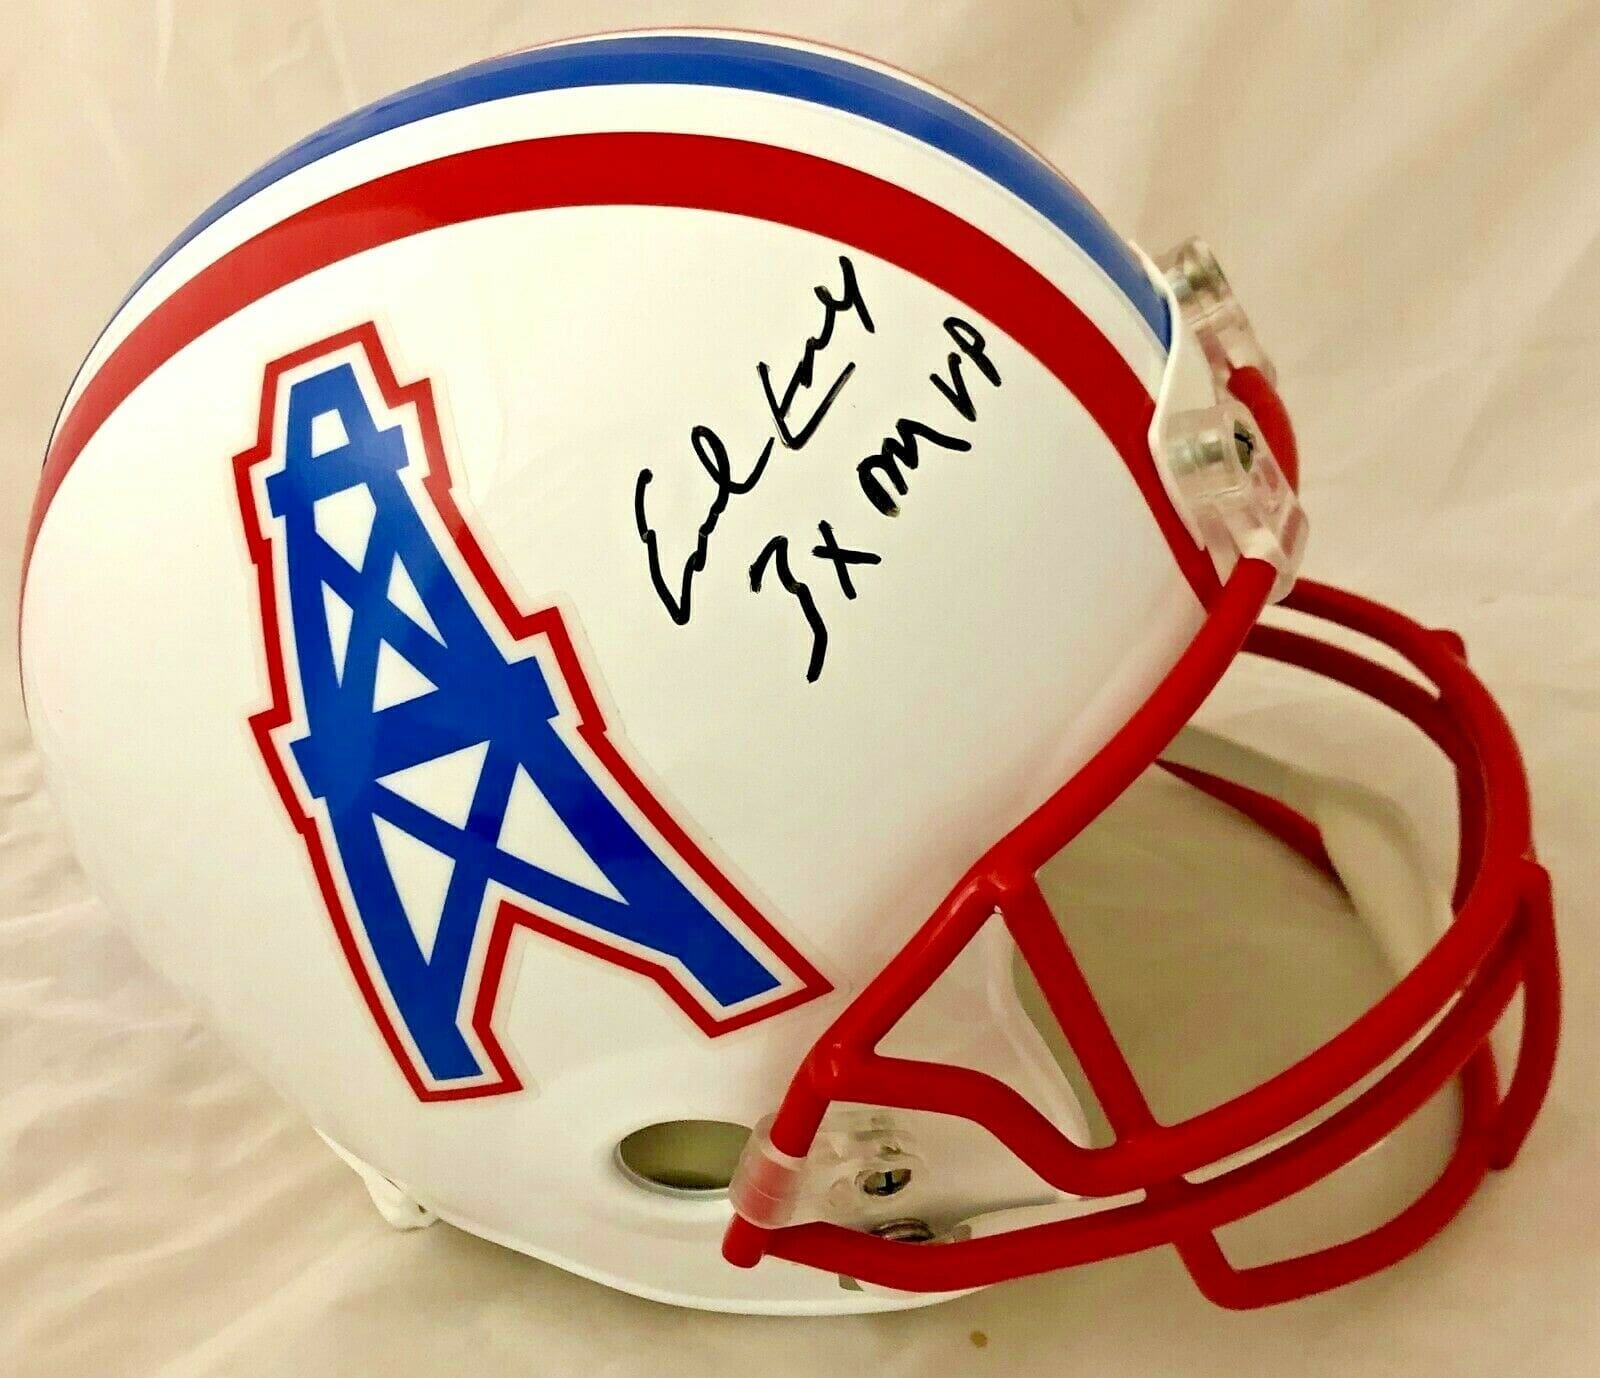 earl campbell autograph products for sale